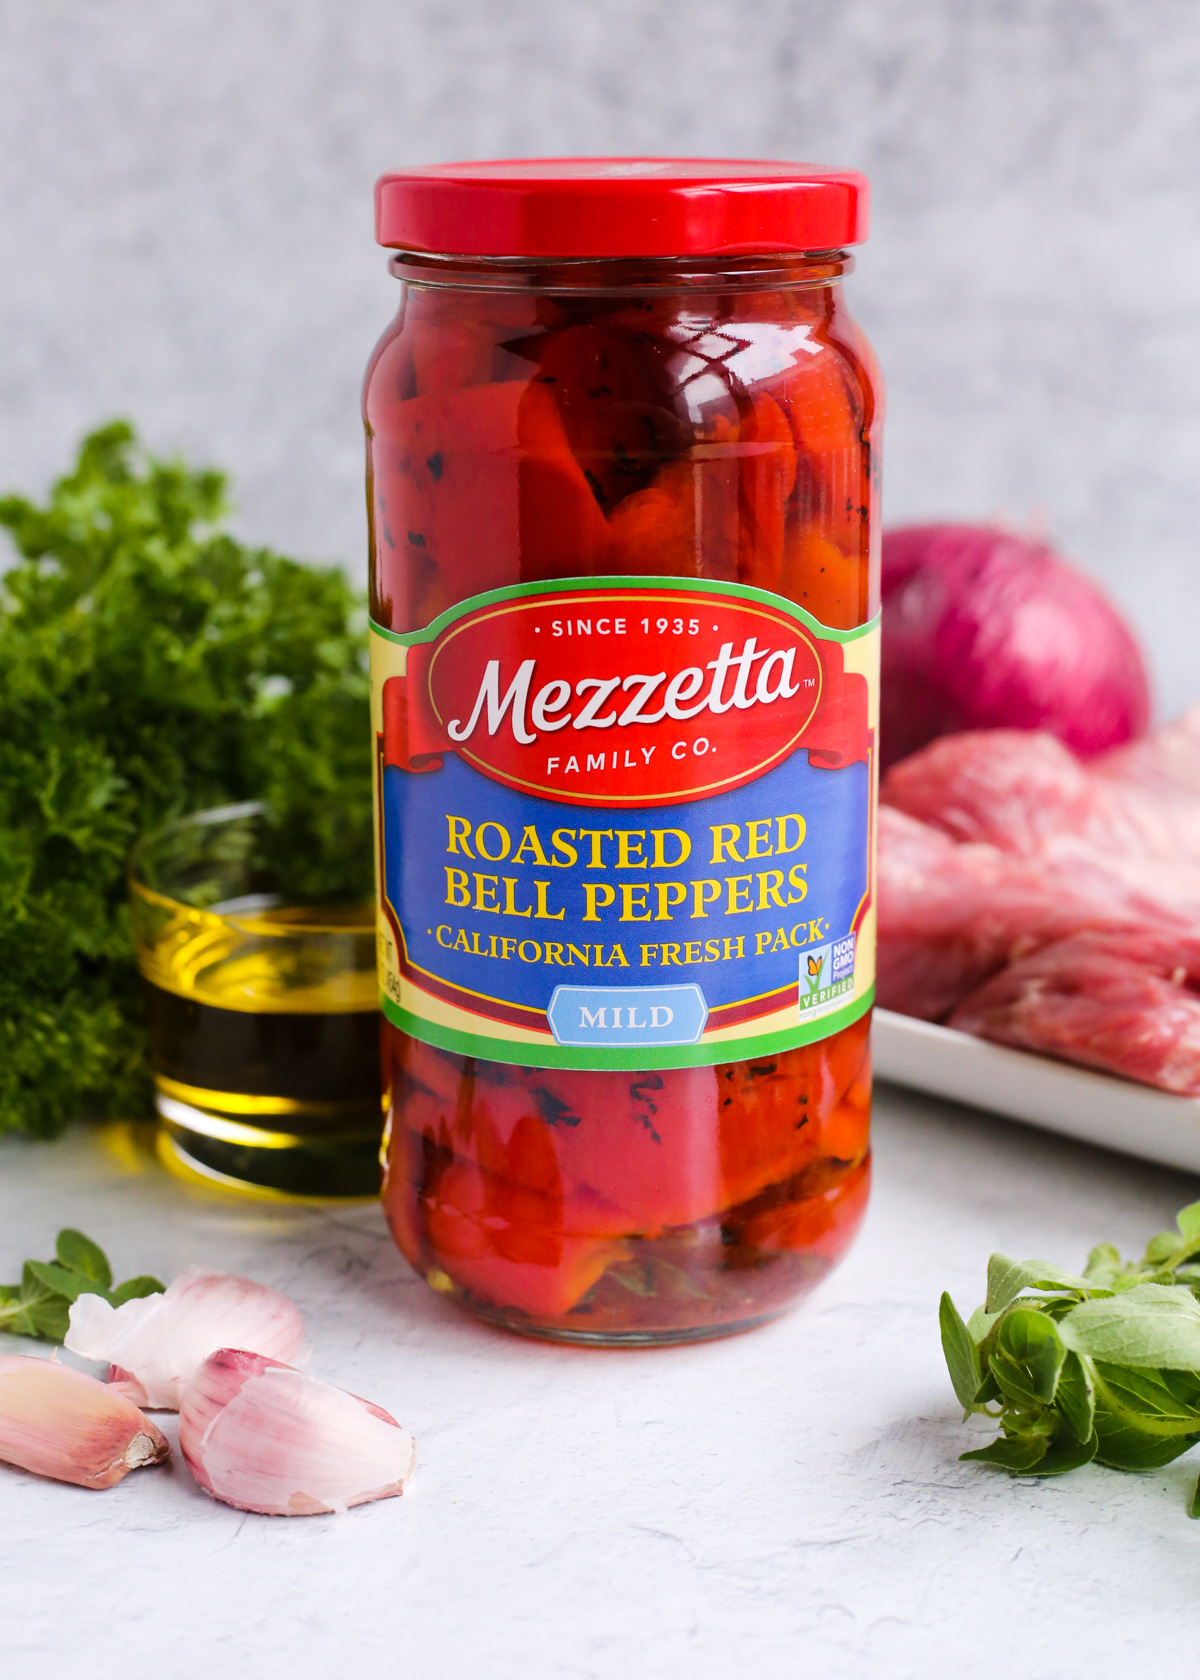 An unopened glass jar of Mezzetta roasted red peppers on a kitchen countertop, surrounded by a clear glass ramekin of olive oil, garlic cloves, green herbs, and a red onion